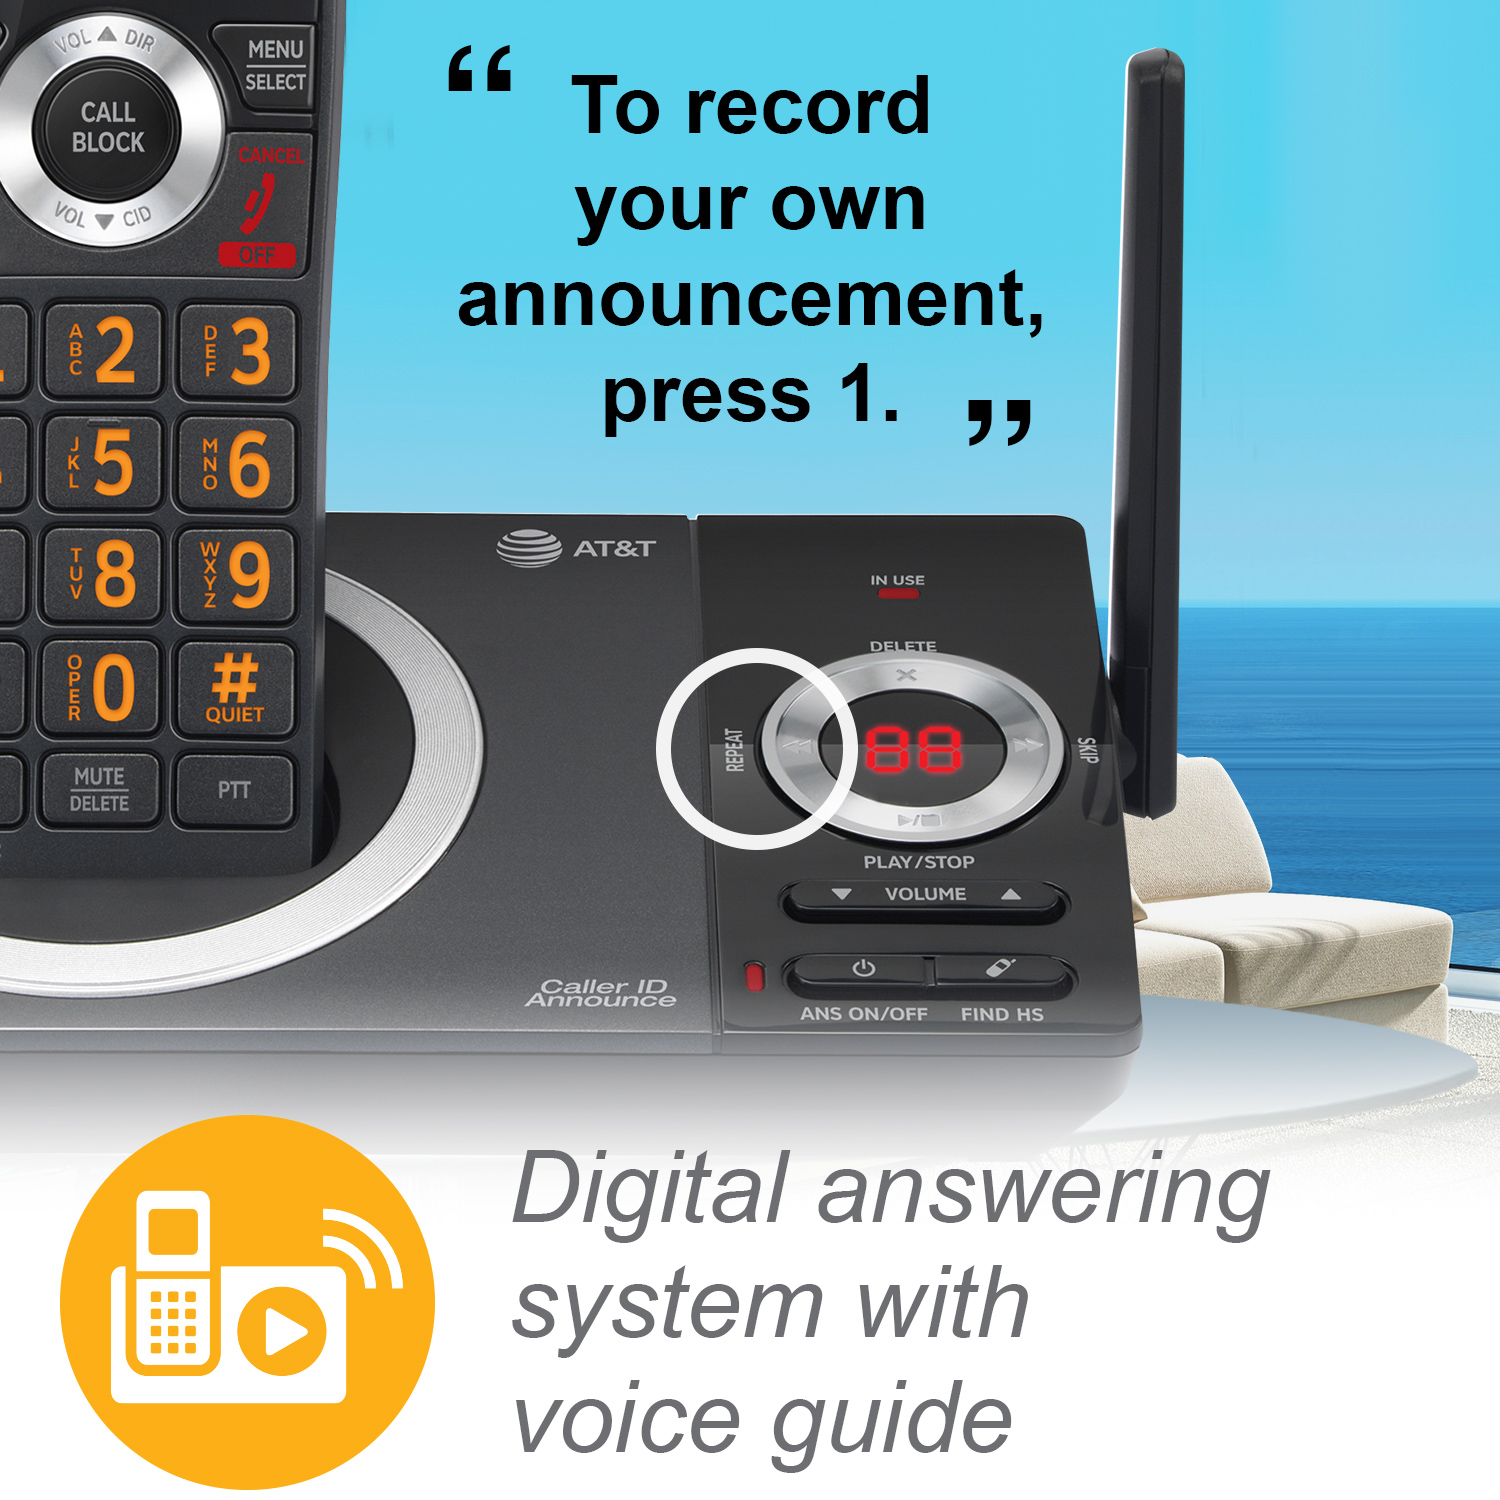 2-Handset Expandable Cordless Phone with Unsurpassed Range, Smart Call Blocker and Answering System - view 6